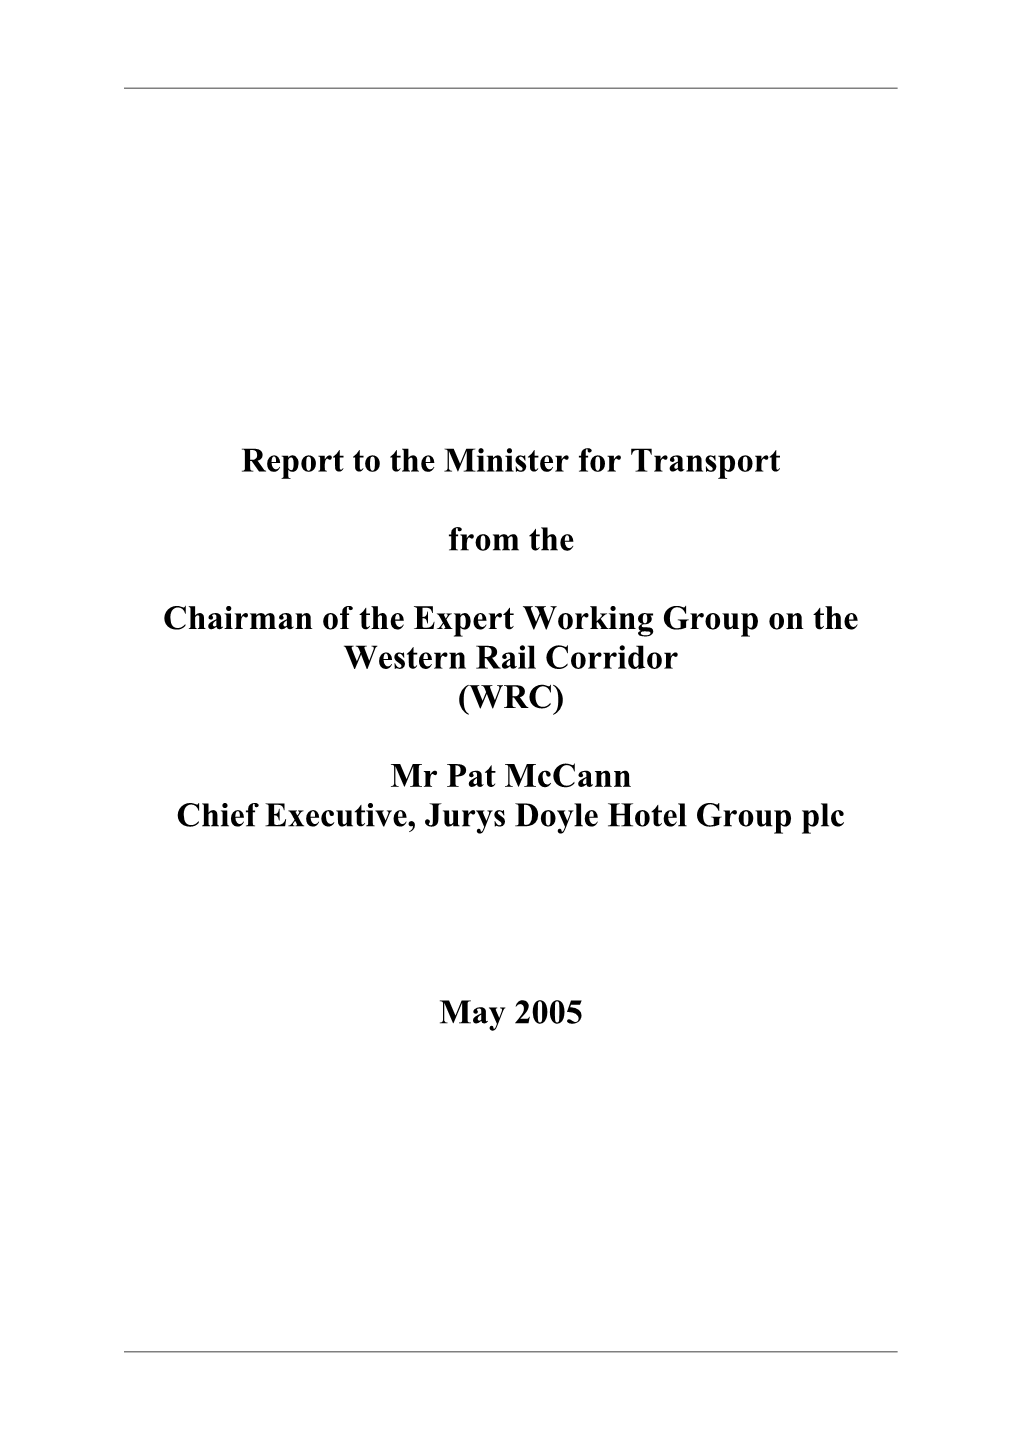 Interim Report to the Minister for Transport from the Chairman of the Expert Working Group